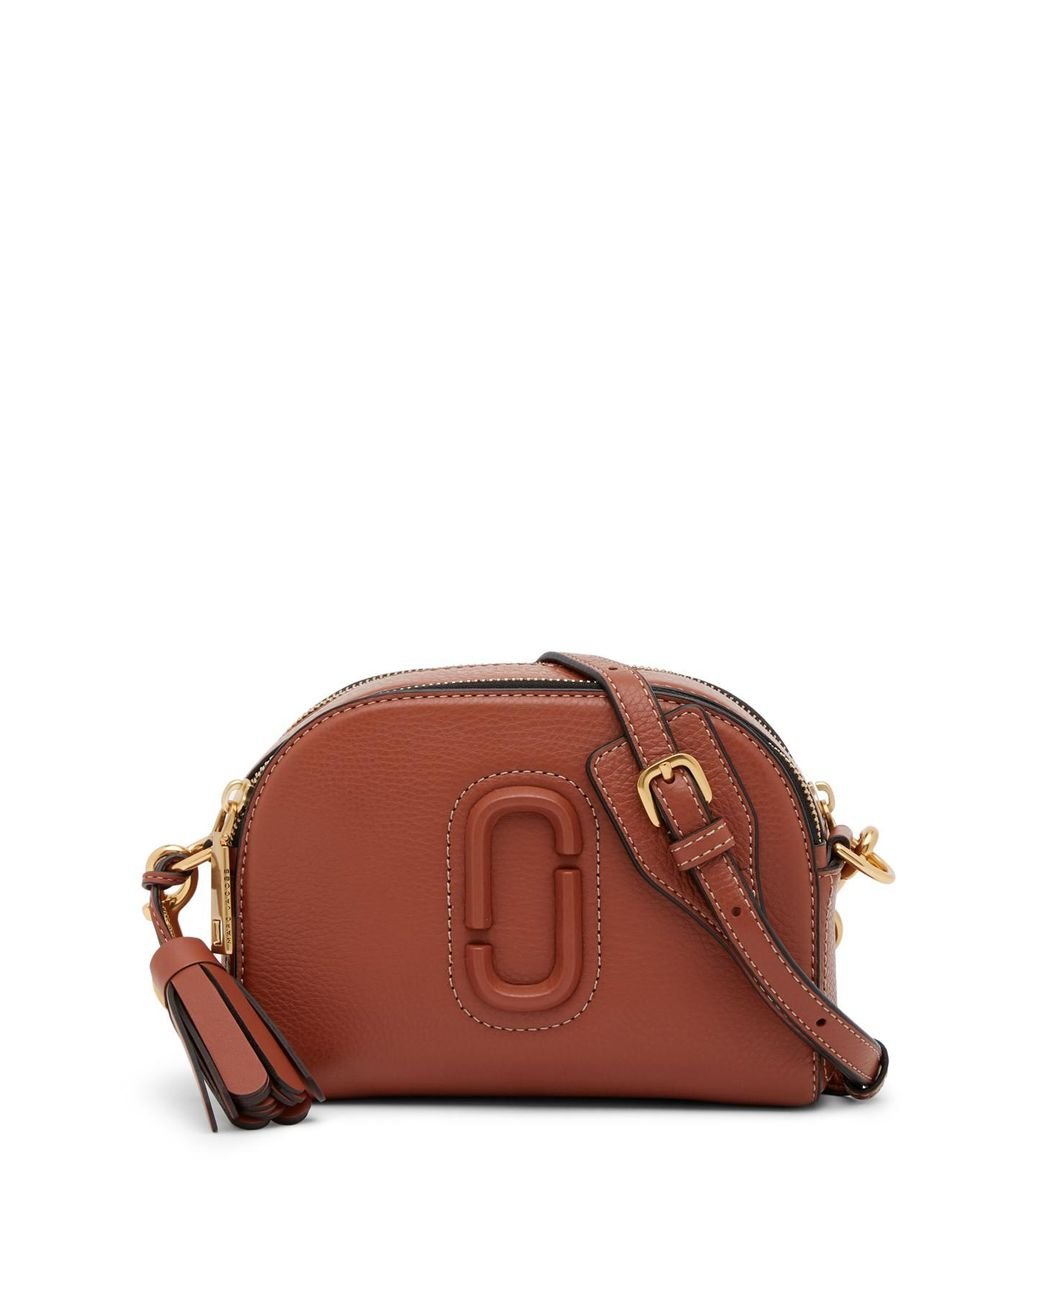 Marc Jacobs Shutter Leather Crossbody Bag in Brown | Lyst